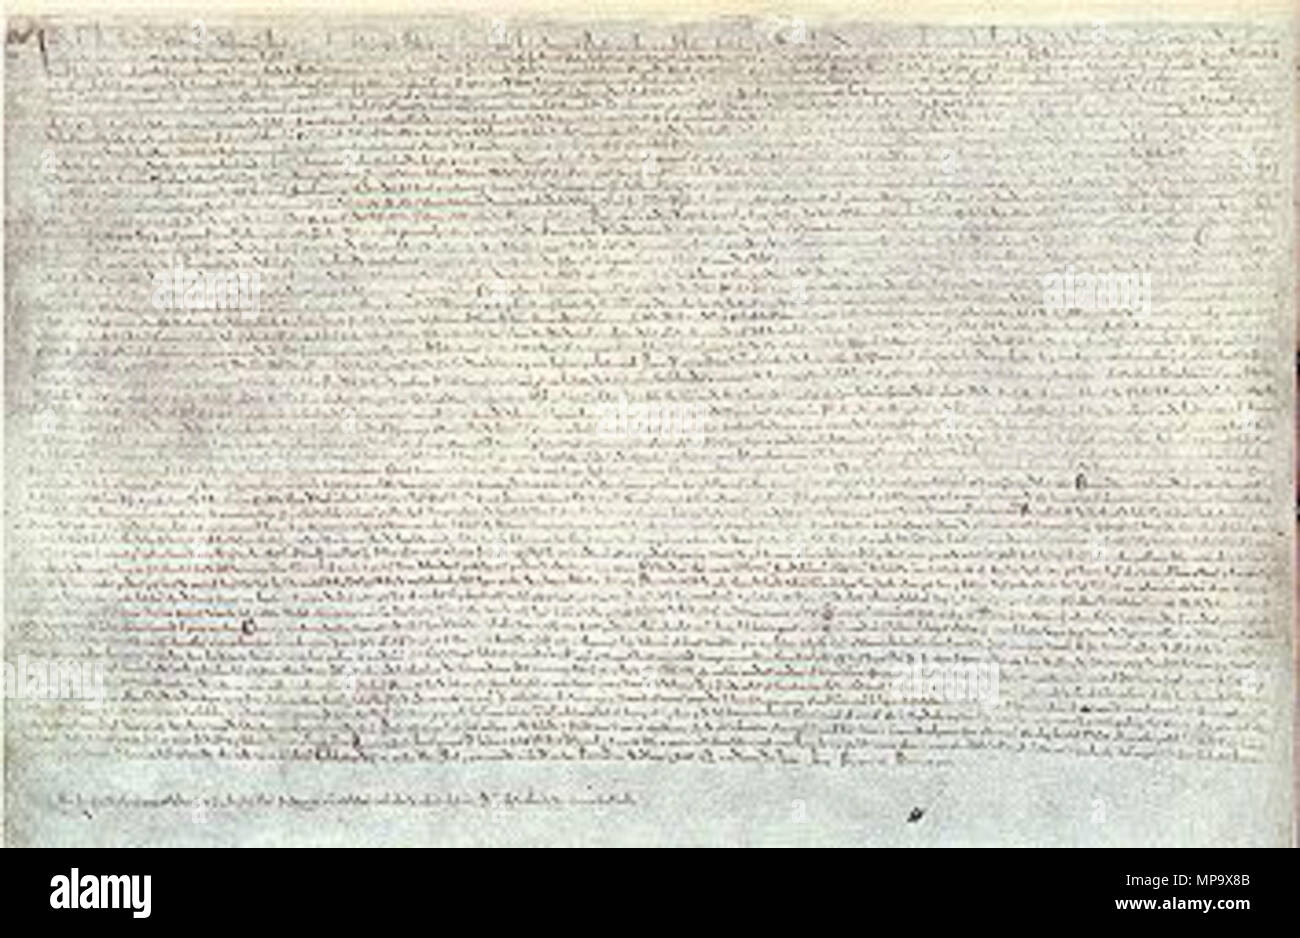 English: The Magna Carta (originally known as the Charter of Liberties) of  1215, written in iron gall ink on parchment in medieval Latin, using  standard abbreviations of the period, authenticated with